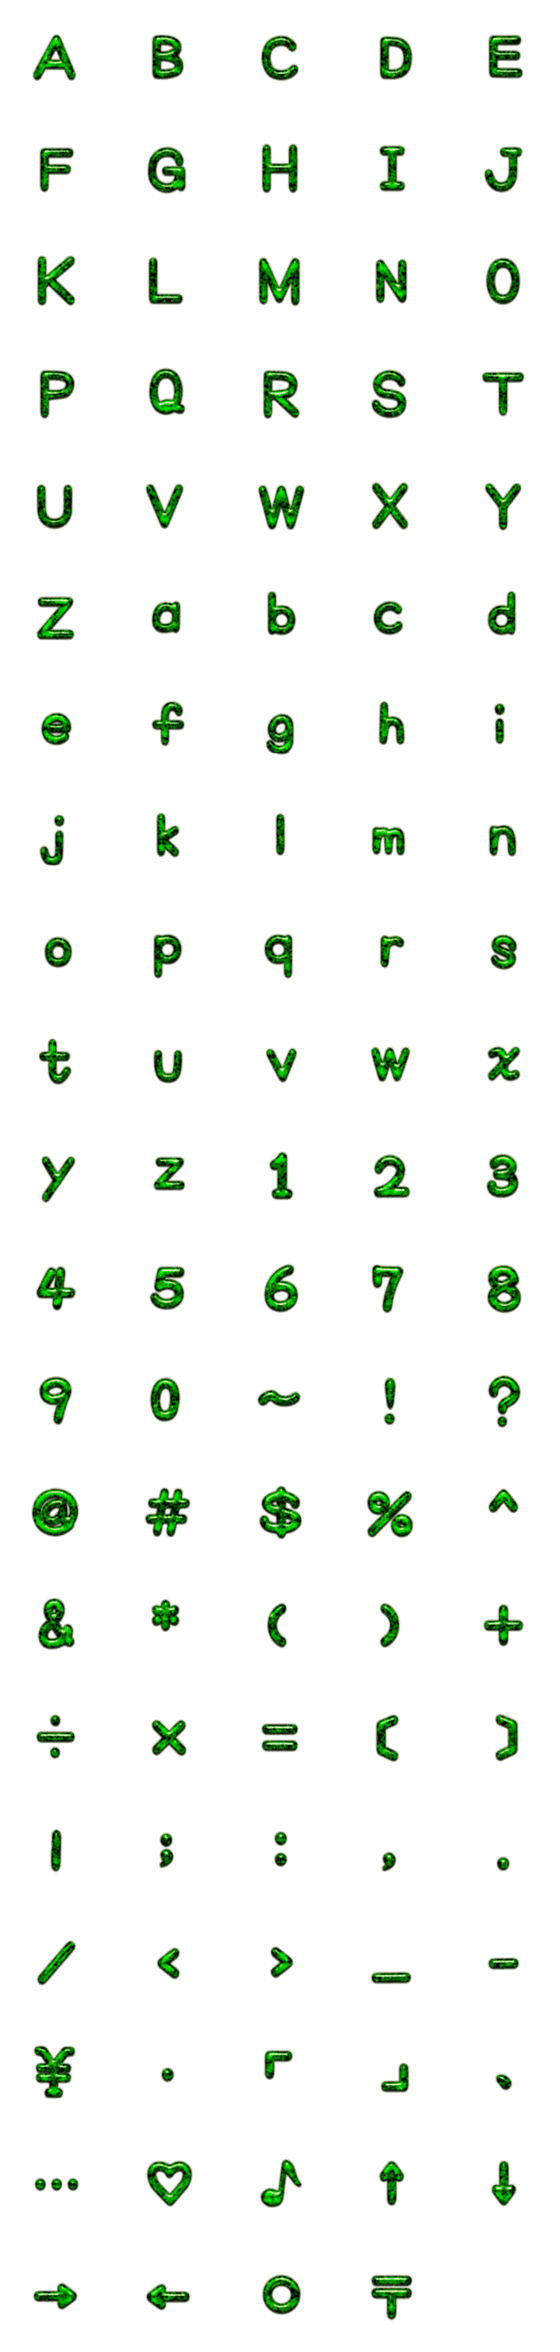 [LINE絵文字]Emerald wordの画像一覧